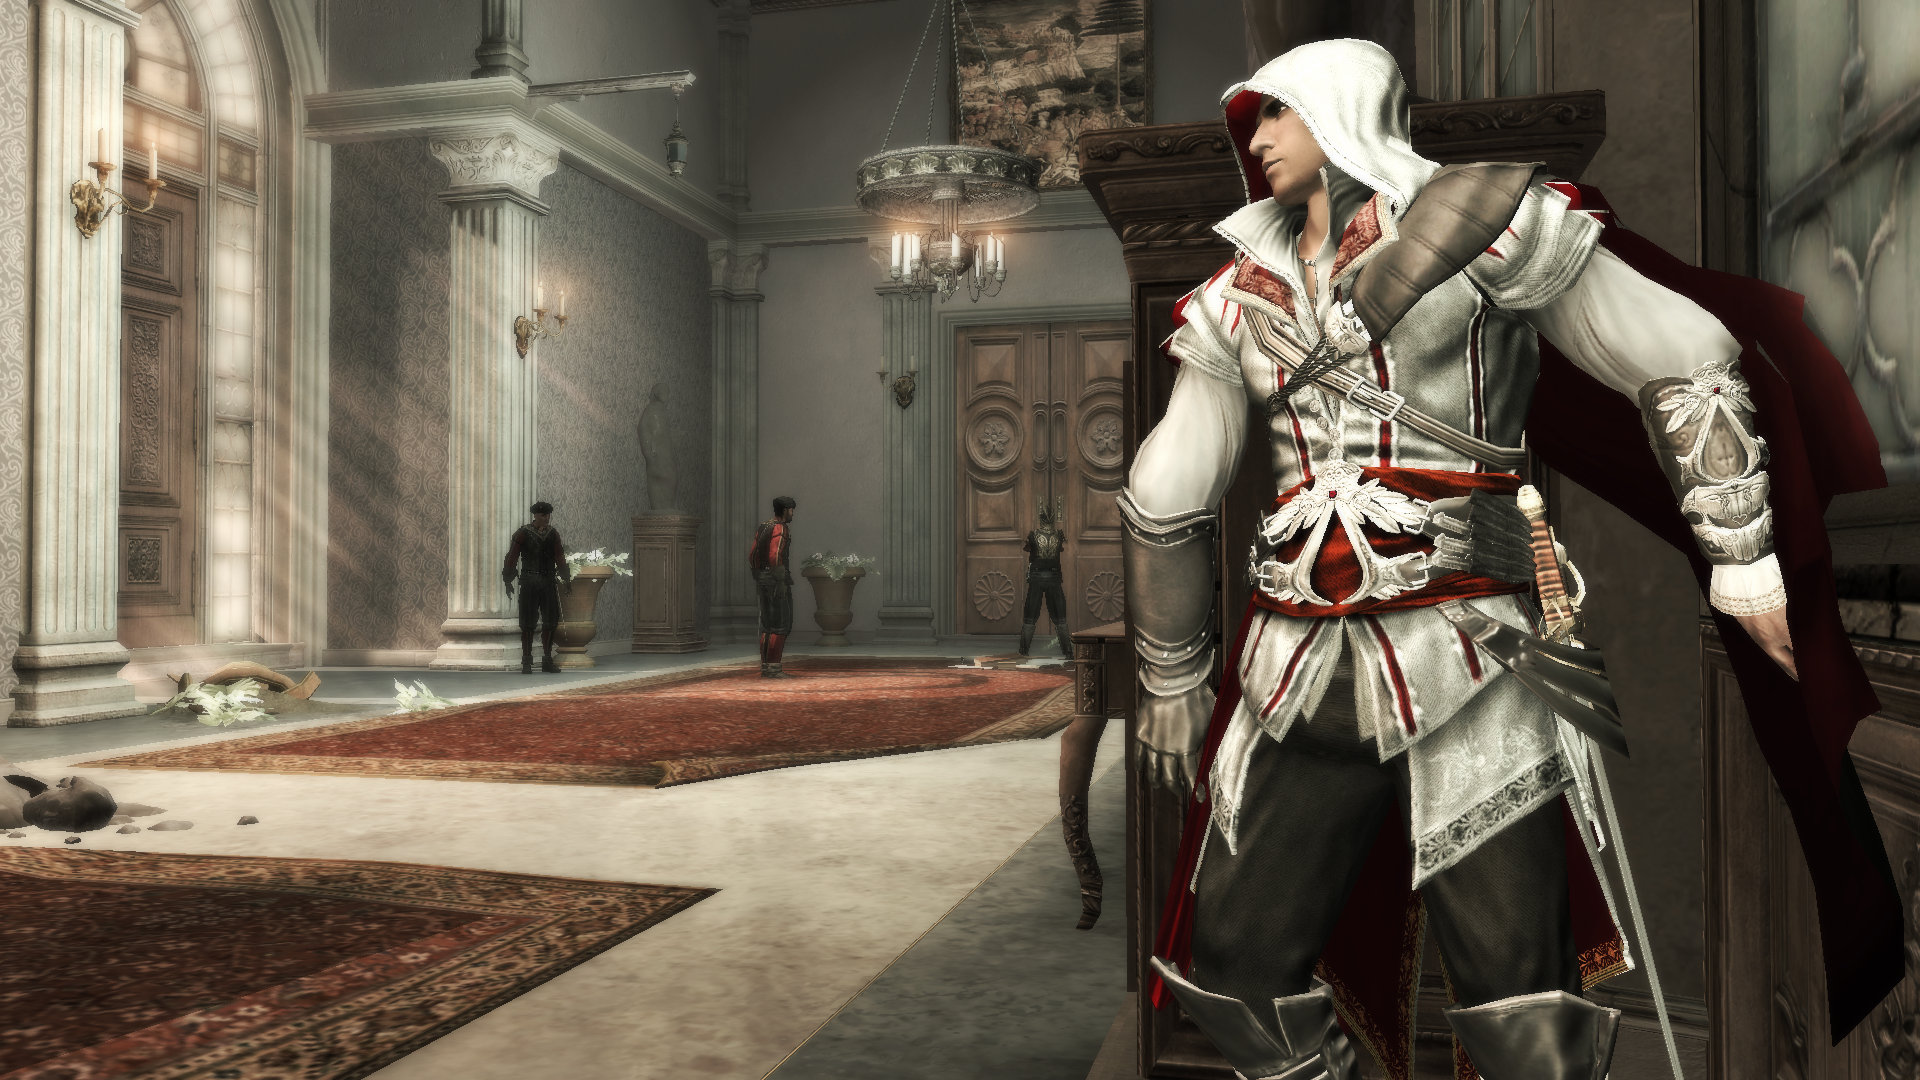 High Resolution Wallpaper | Assassin's Creed II 1920x1080 px